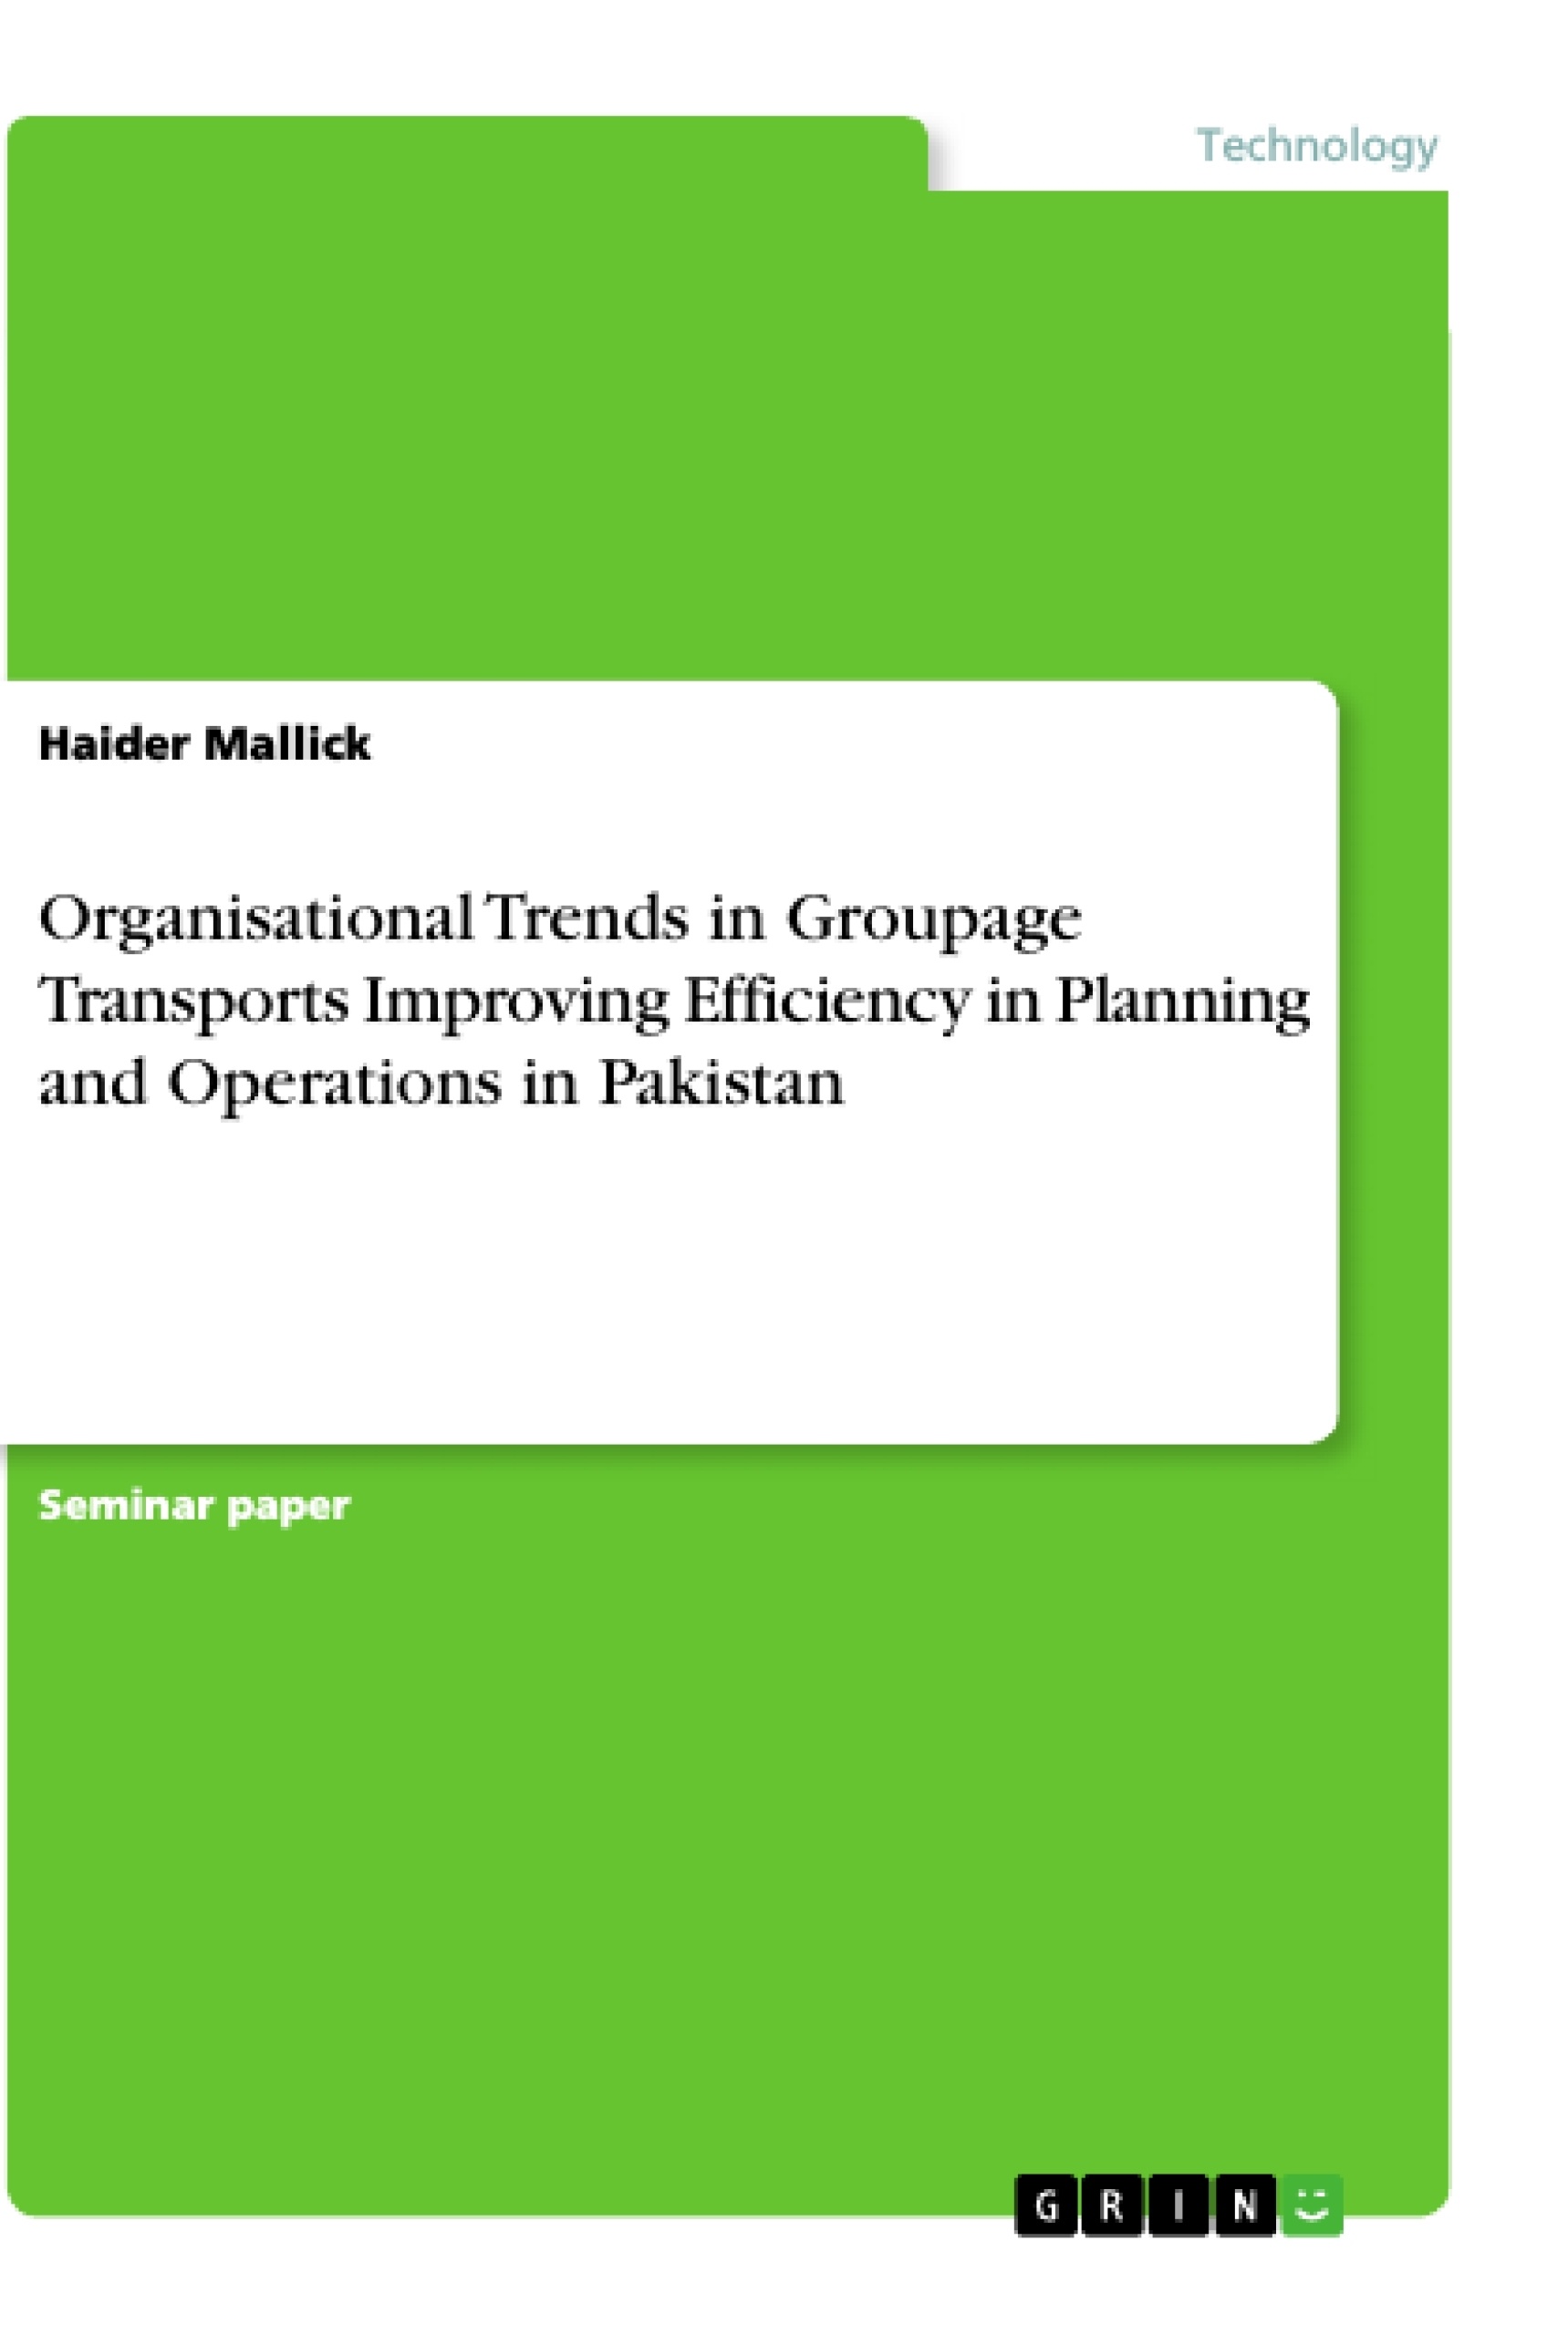 Titel: Organisational Trends in Groupage Transports Improving Efficiency in Planning and Operations in Pakistan